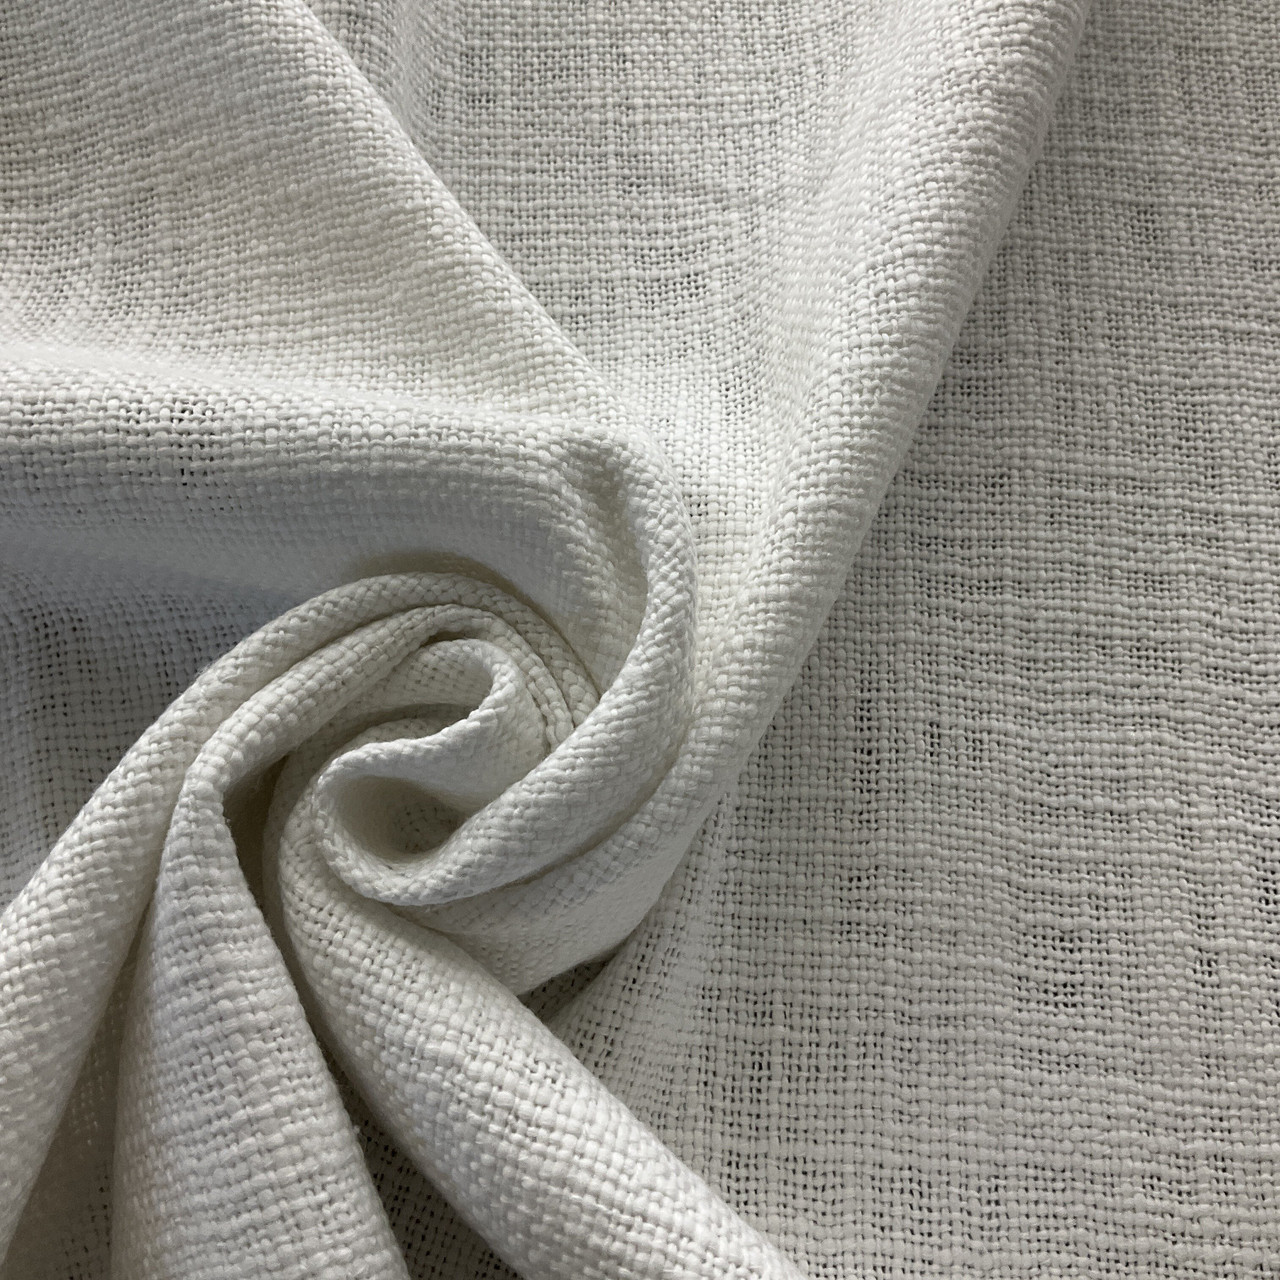 Number One Textiles Solid Slub Cotton Woven White | Medium Weight Woven  Fabric | Home Decor Fabric | 54 Wide